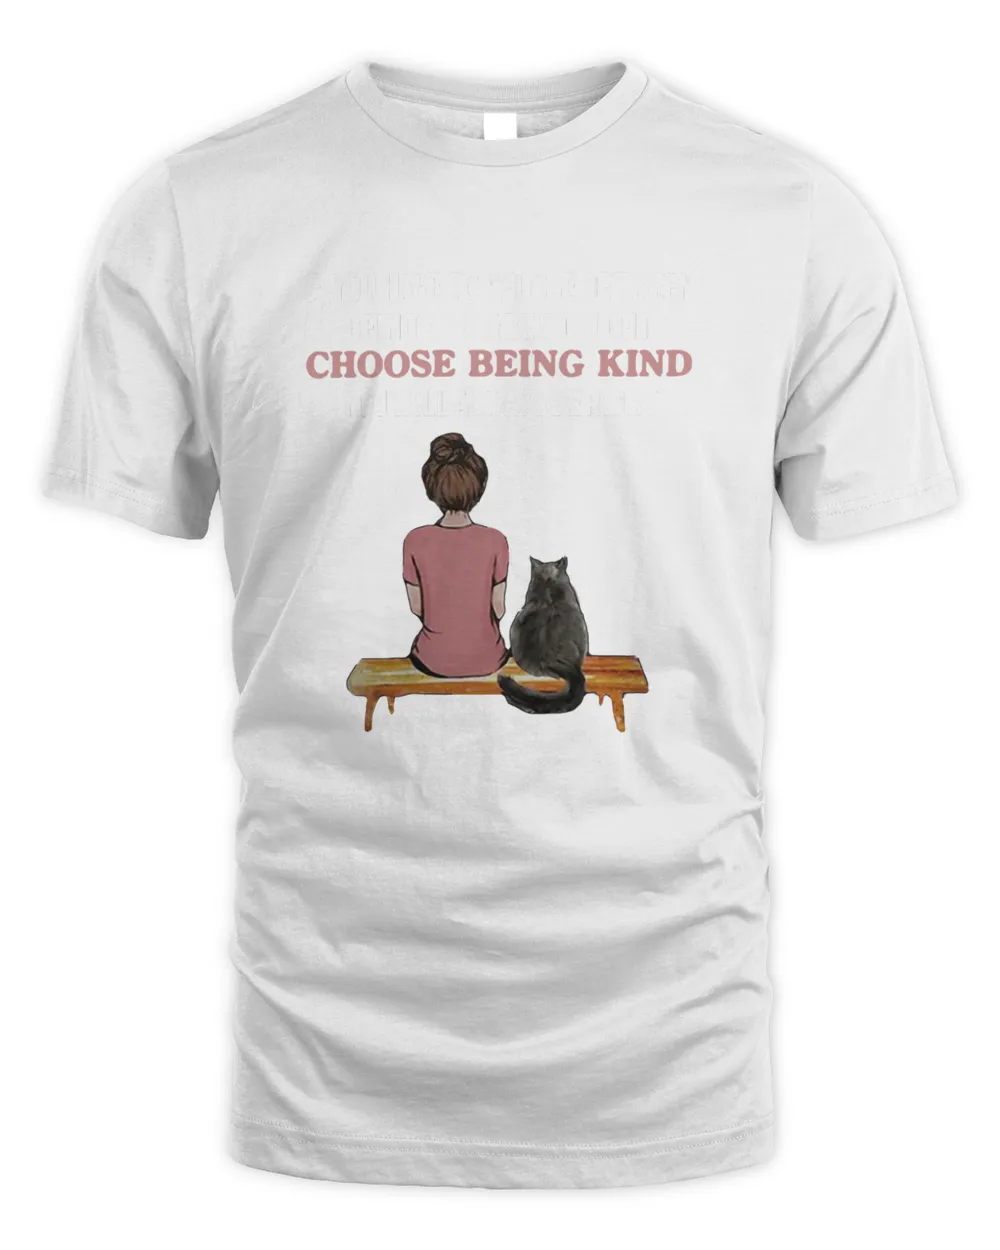 If You Have To Choose Between Being Kind And Being